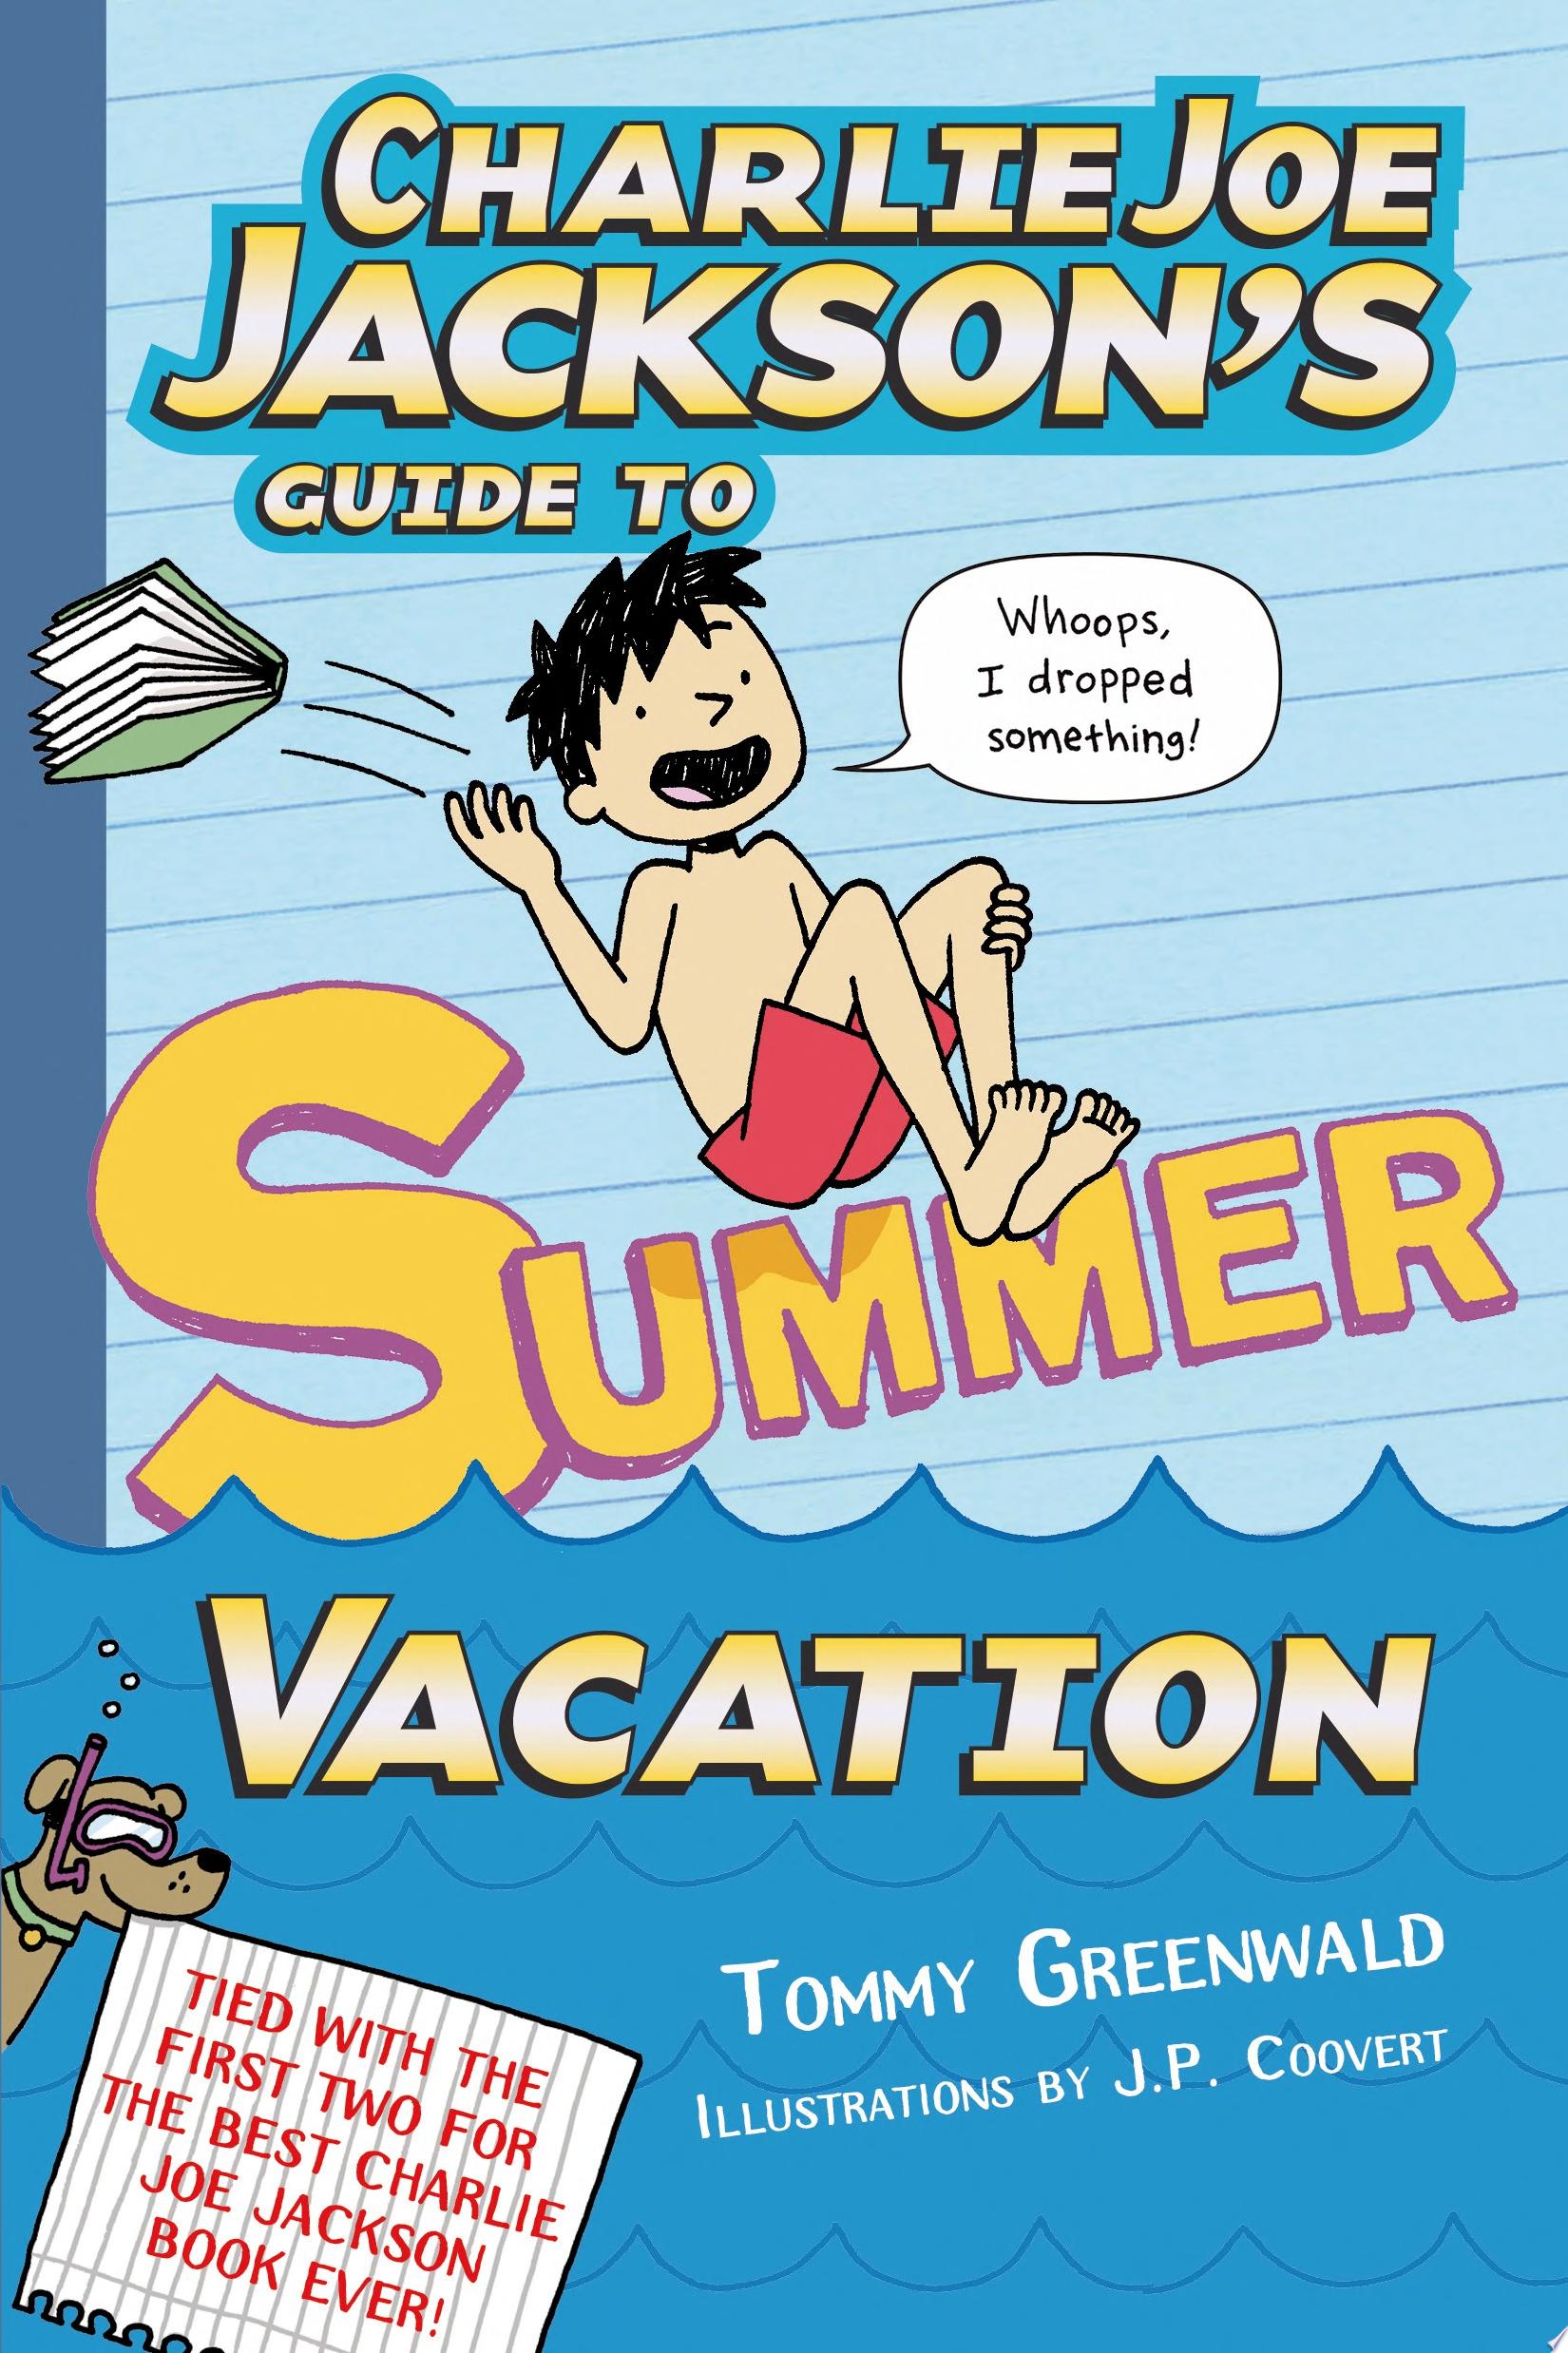 Image for "Charlie Joe Jackson's Guide to Summer Vacation"